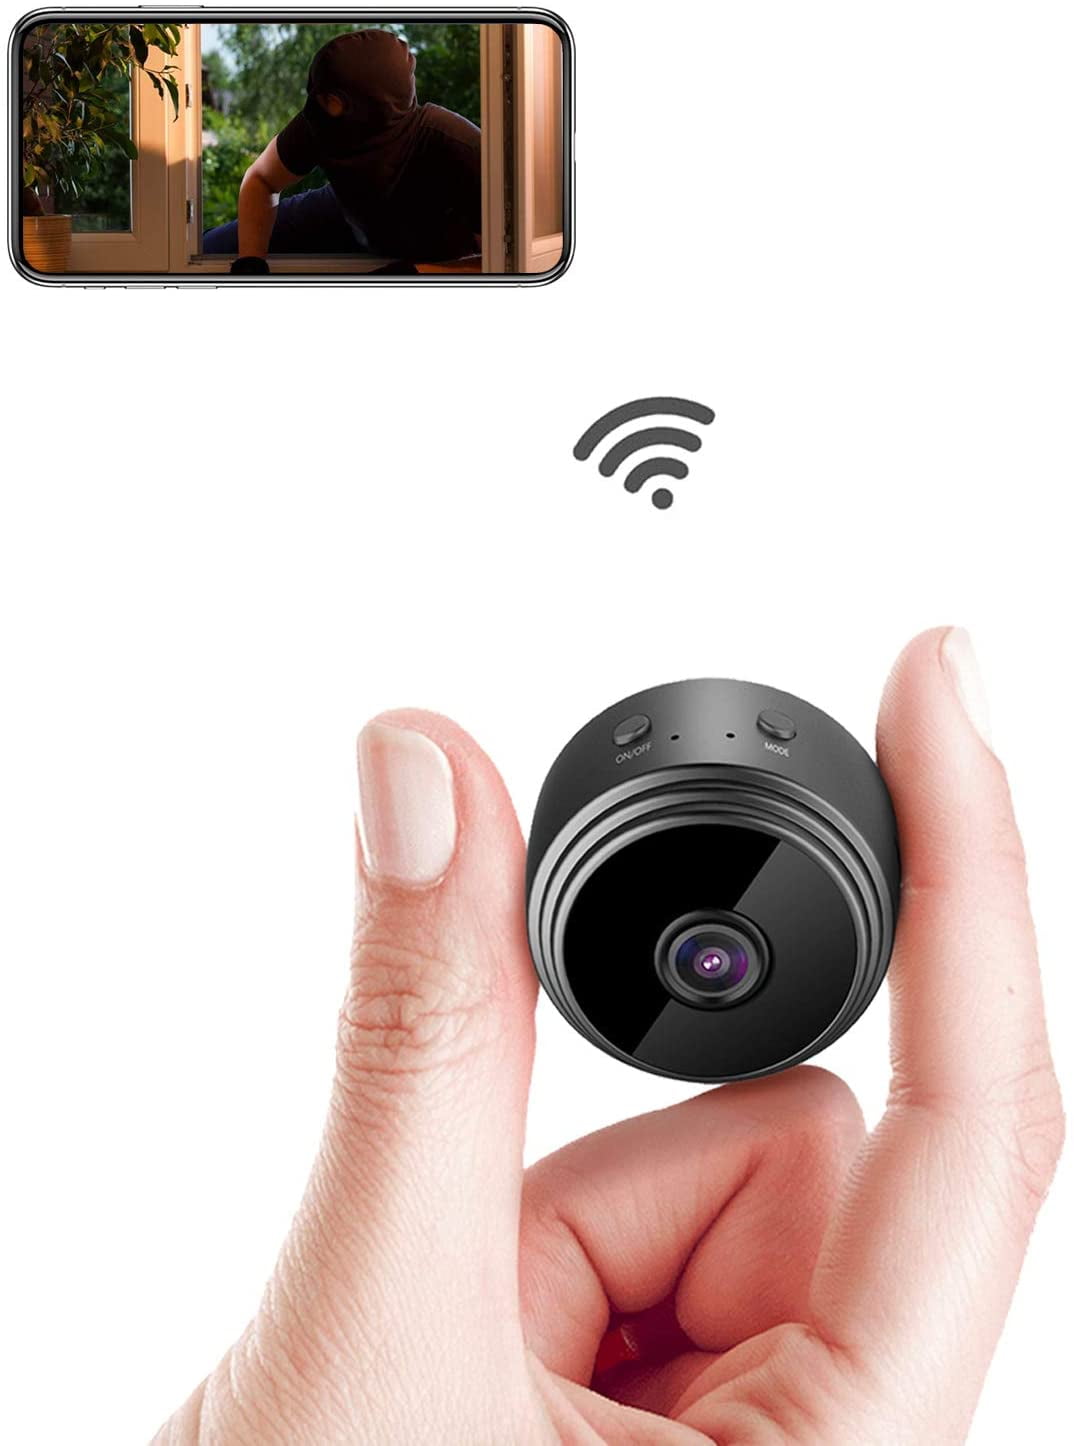 Hoelahoep Diplomaat de elite WiFi Mini Camera Ultra Compact Network Camera Wireless IP Camera 1080P with  Motion Detection Night Vision Cameras, Nanny Baby Pet Cam for iPhone /  Android Phone / iPad - Walmart.com